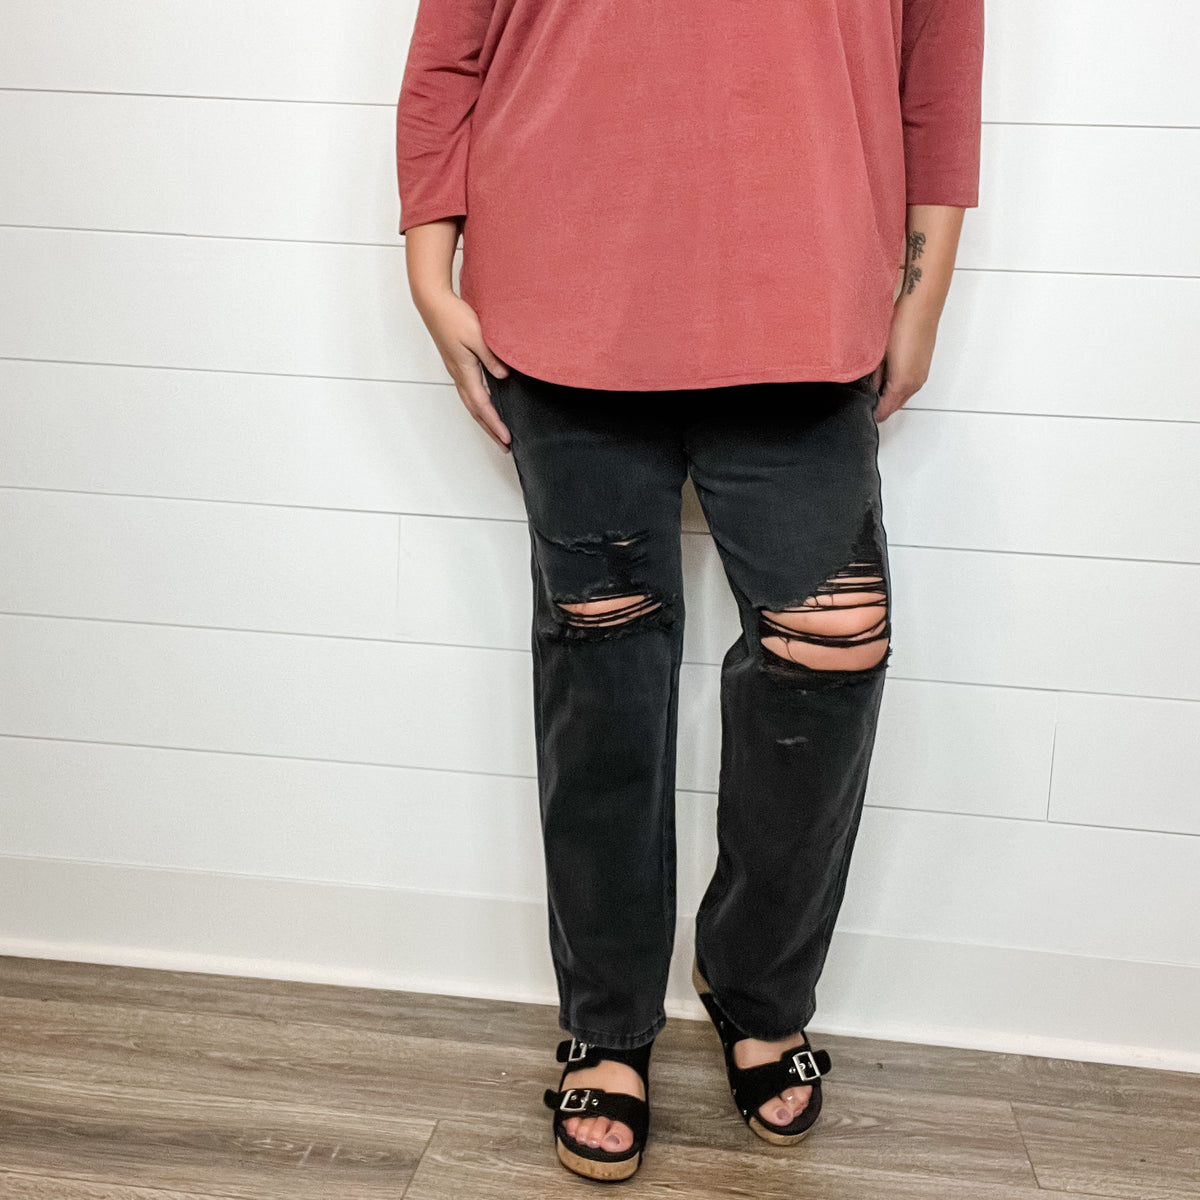 These jeans are magic! The feel and stretch of legging, but the look o